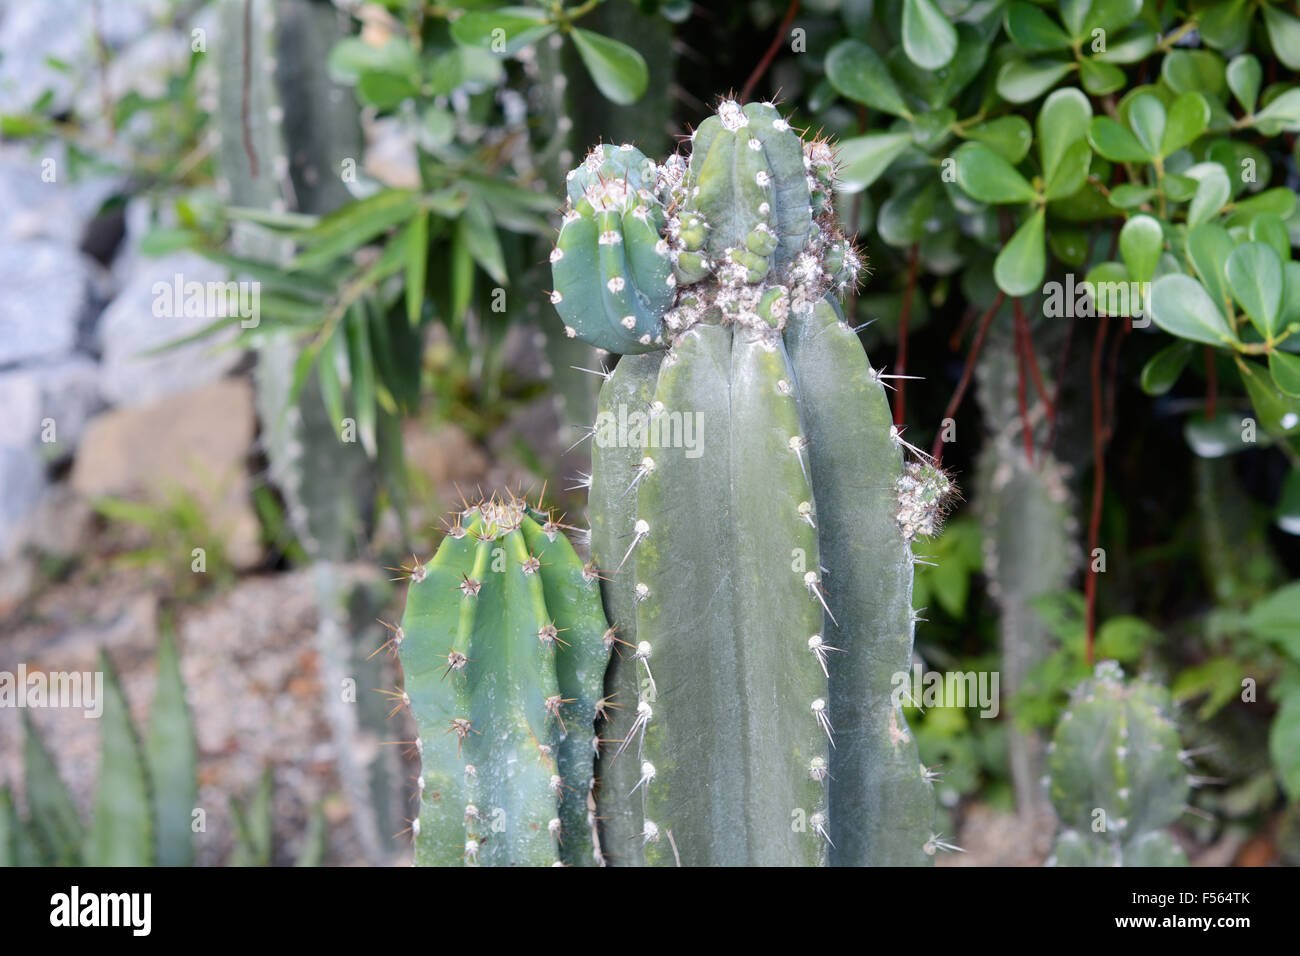 Different cactus and other plants in a botanical garden in Rio de Janeiro, Brazil. Stock Photo